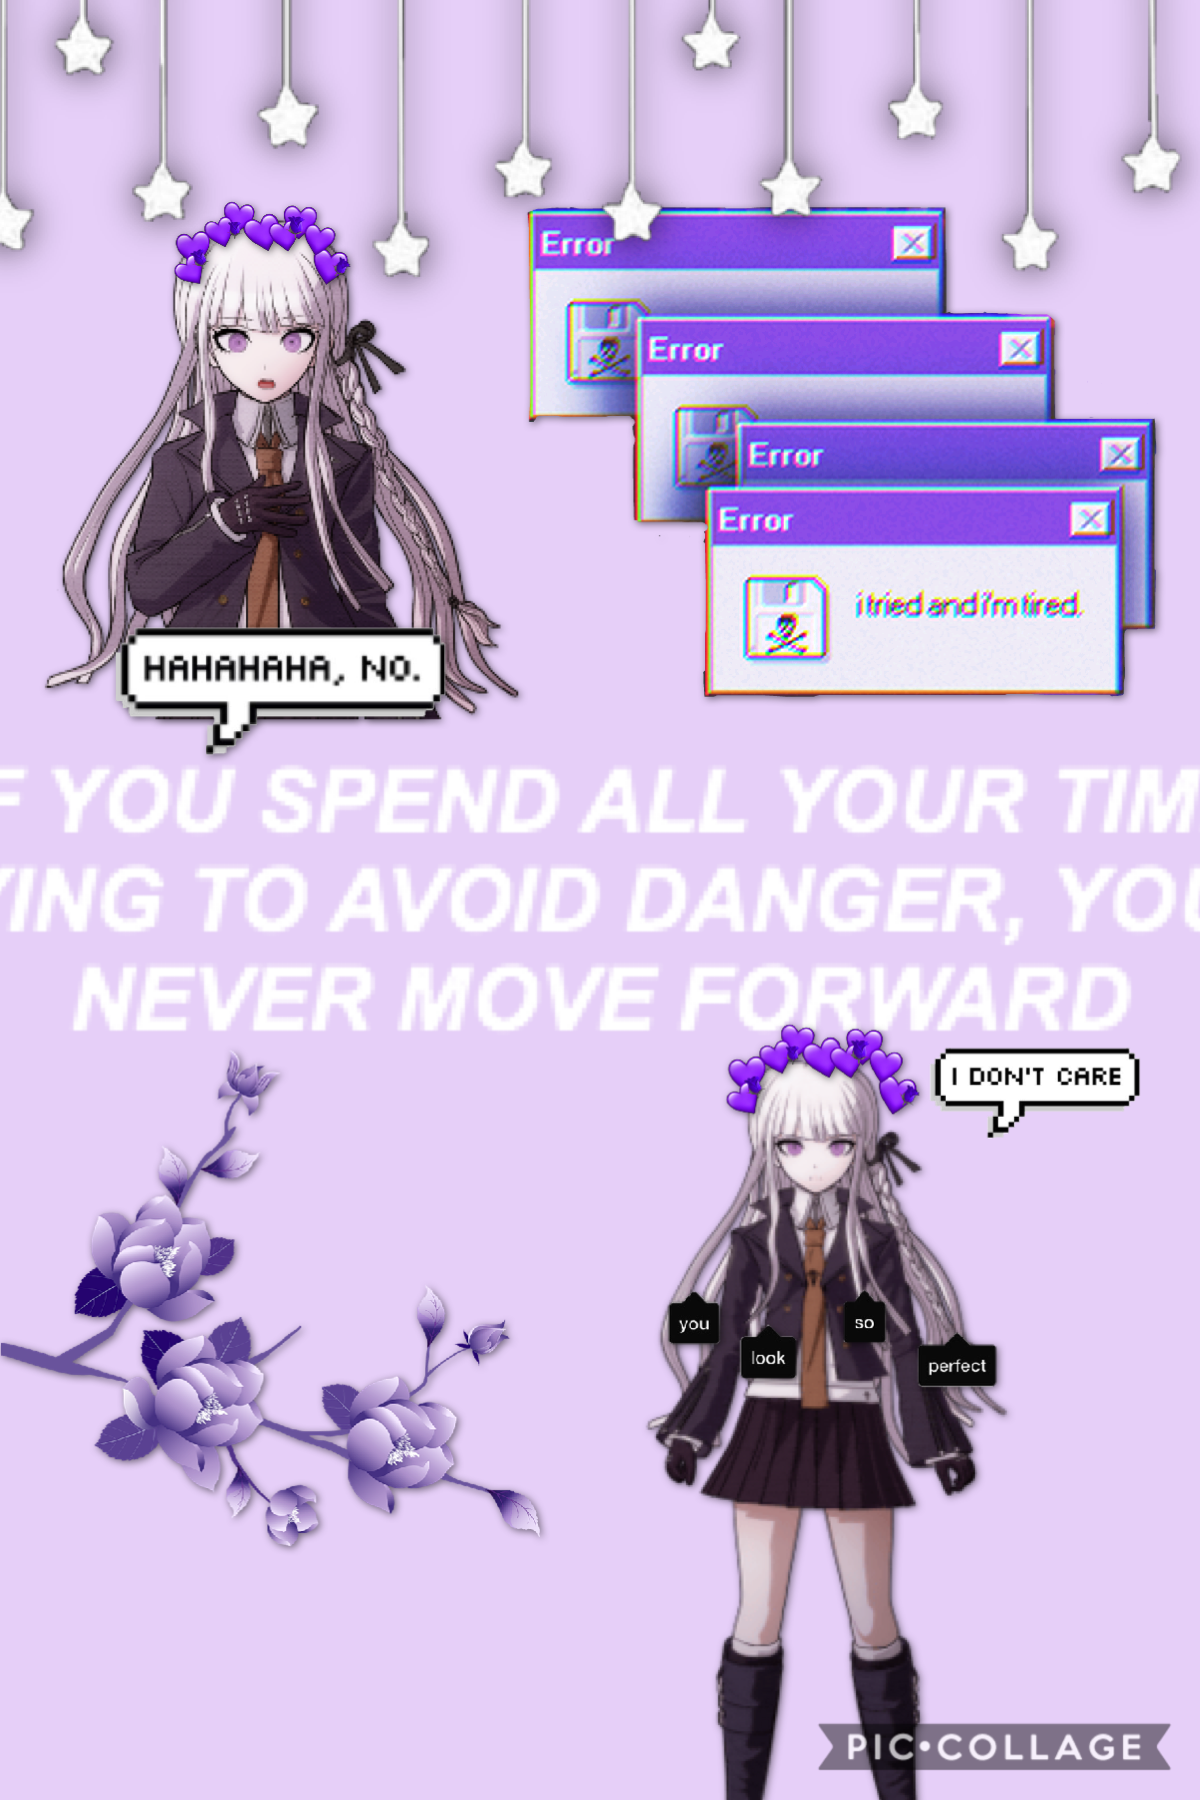 kyoka kirigiri could kidnap my entire family and sell them to the duolingo bird and i would thank her i am having a crisis, um eat your soup kids 